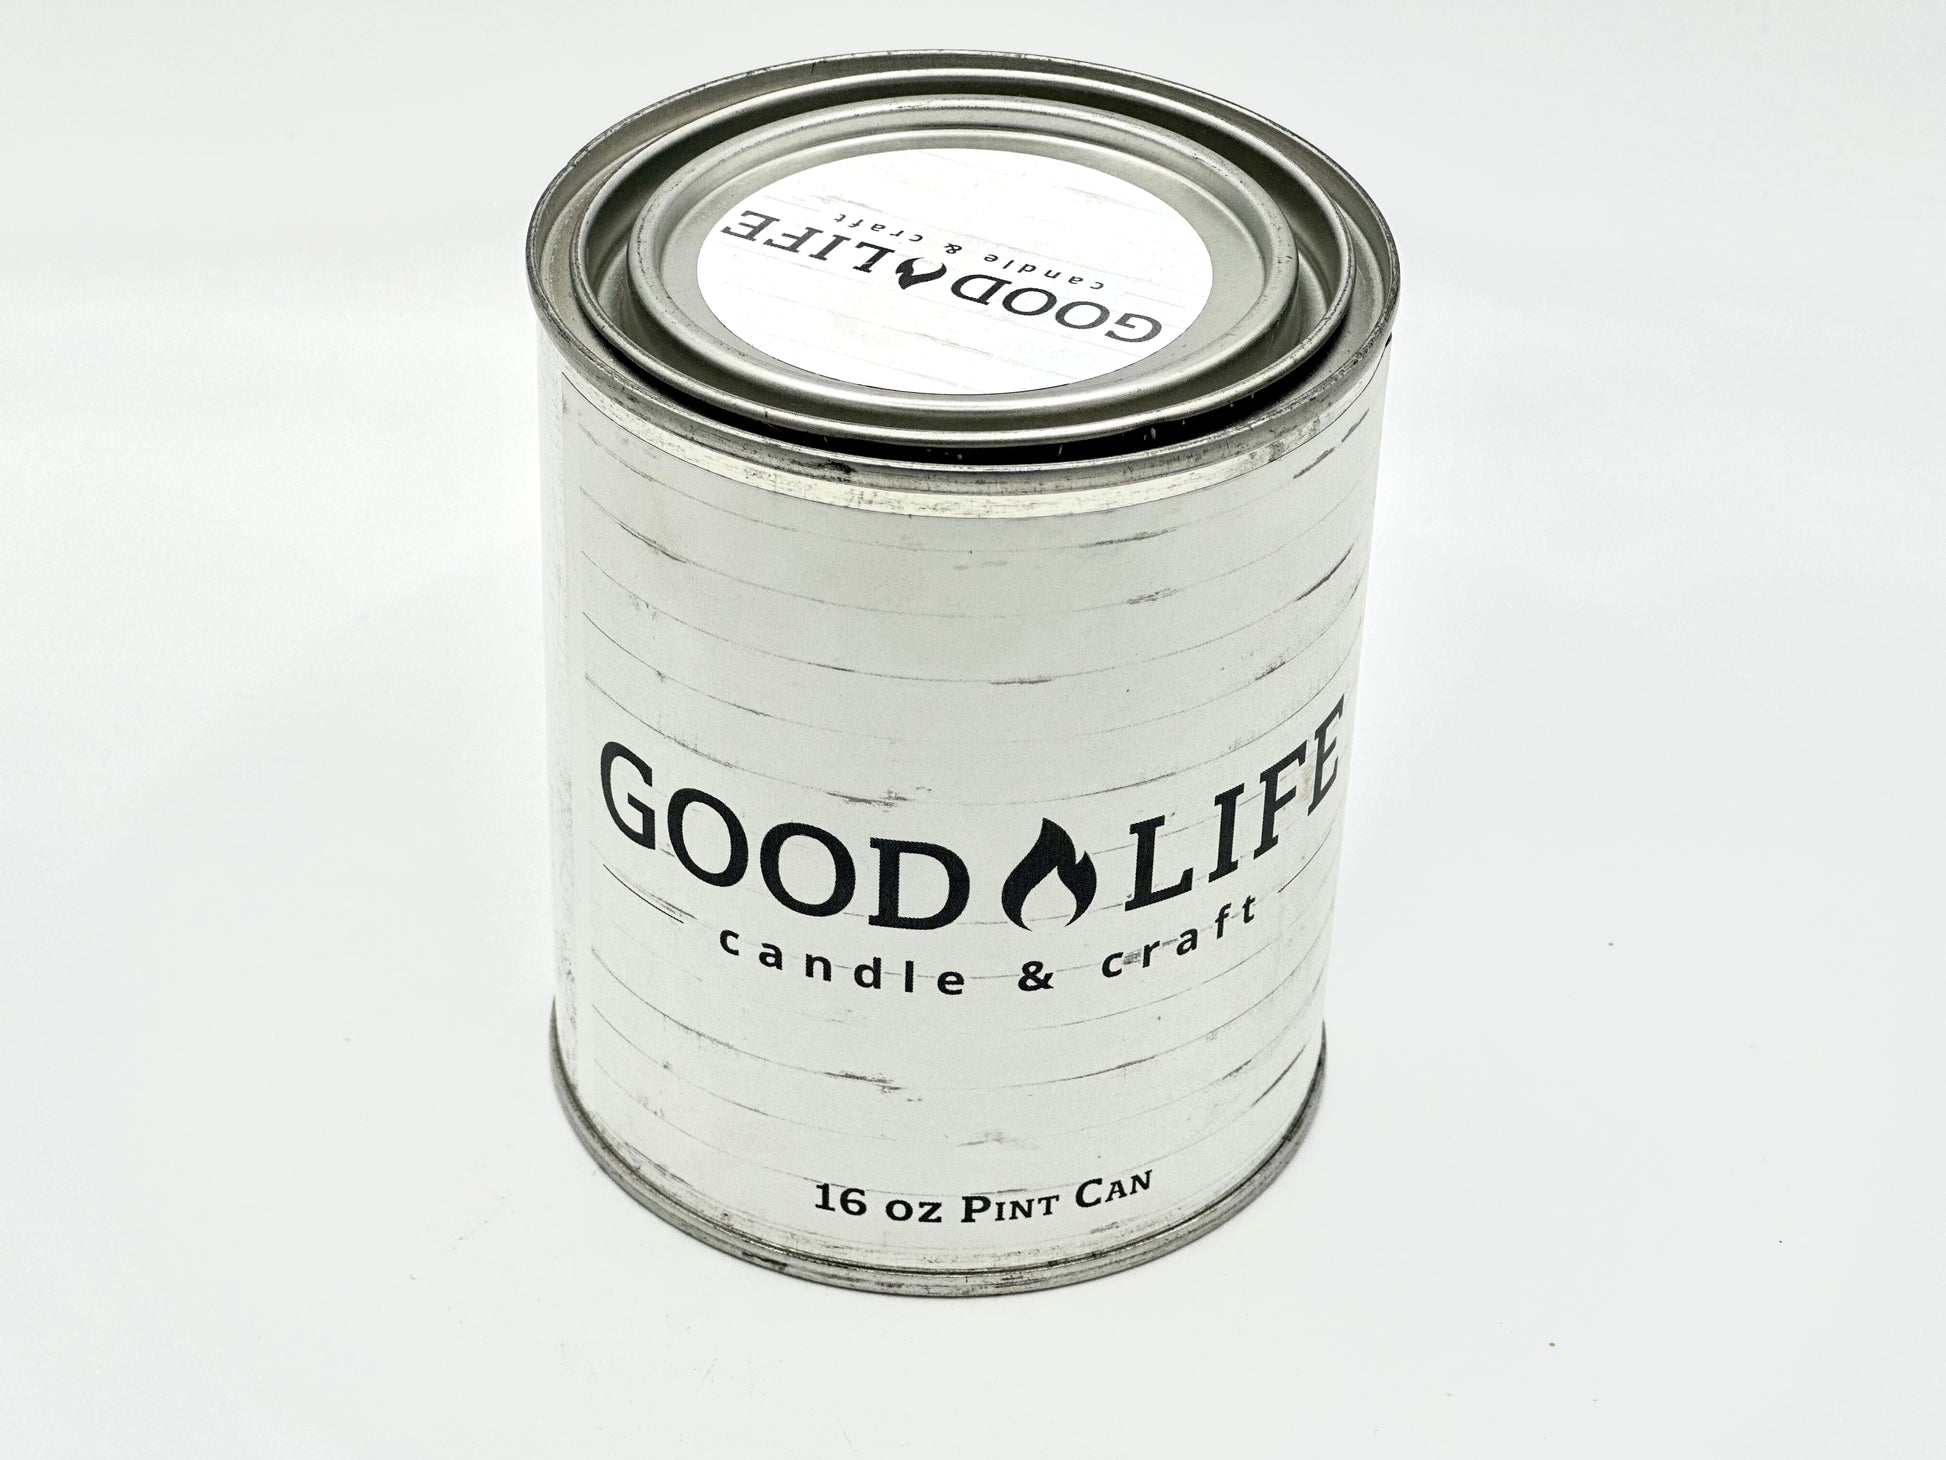 Moondance Scented Wax Melts – Good Life Candle & Craft